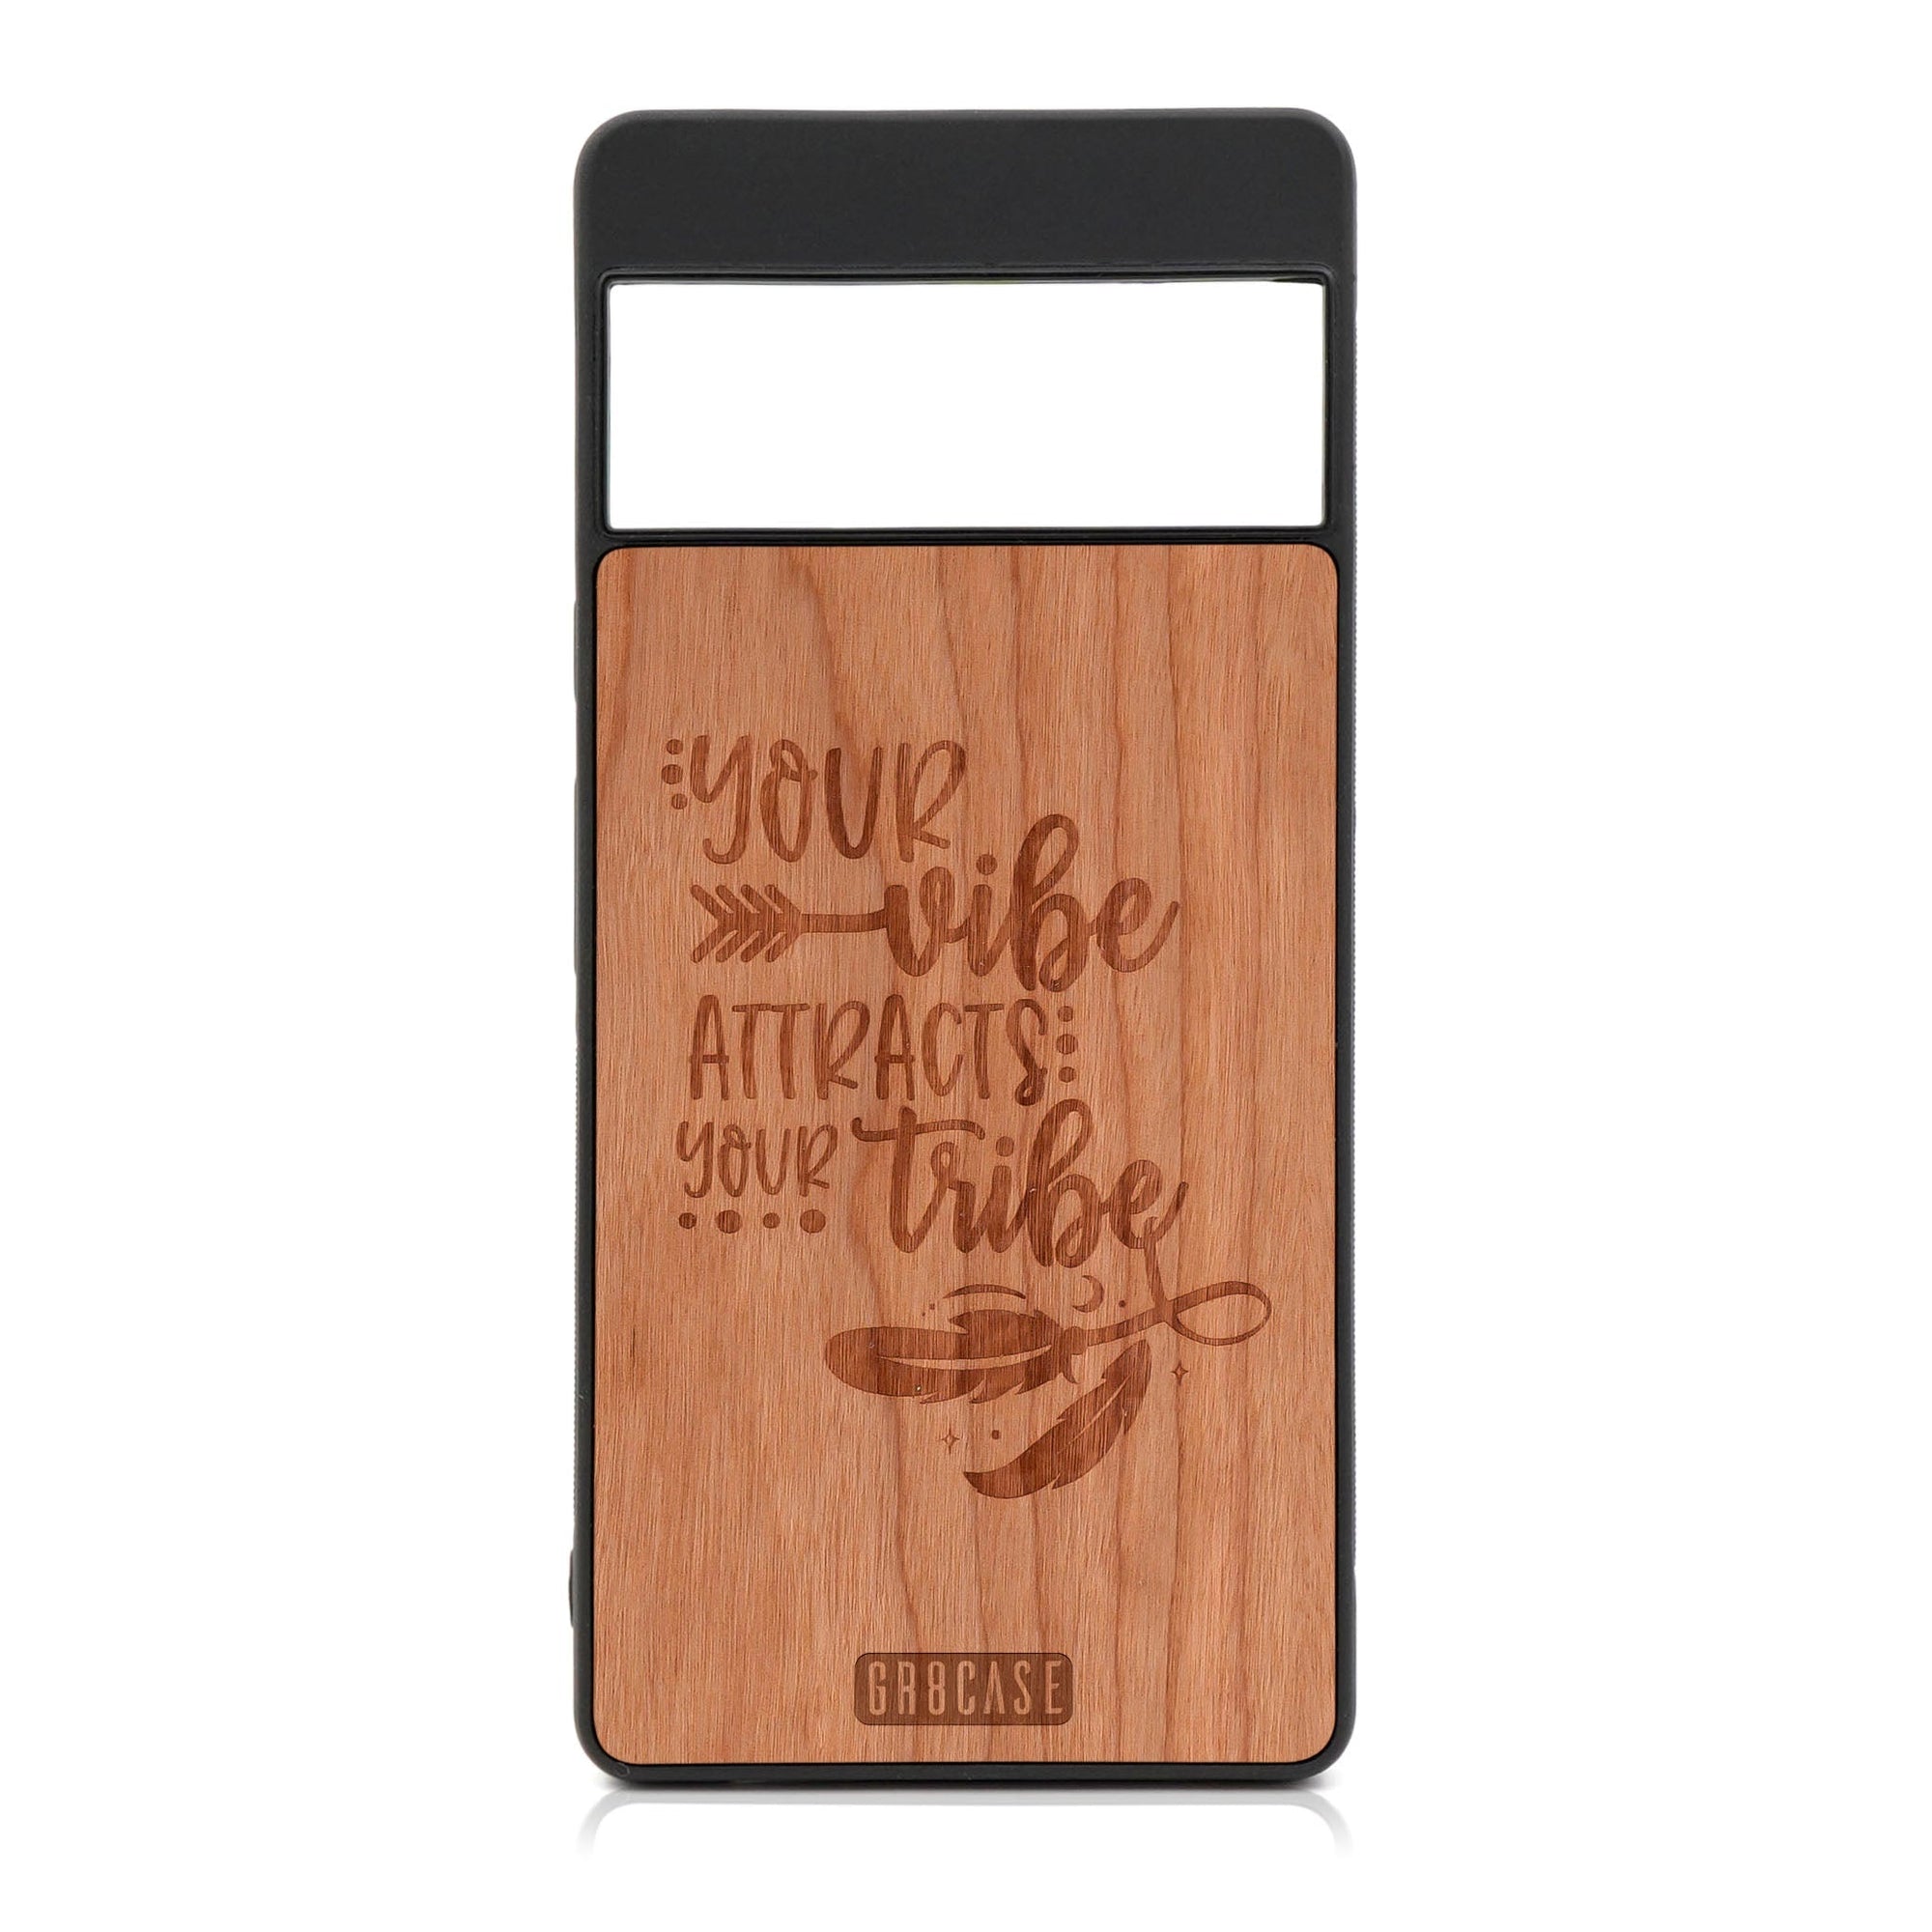 Your Vibe Attracts Your Tribe Design Wood Case For Google Pixel 6A